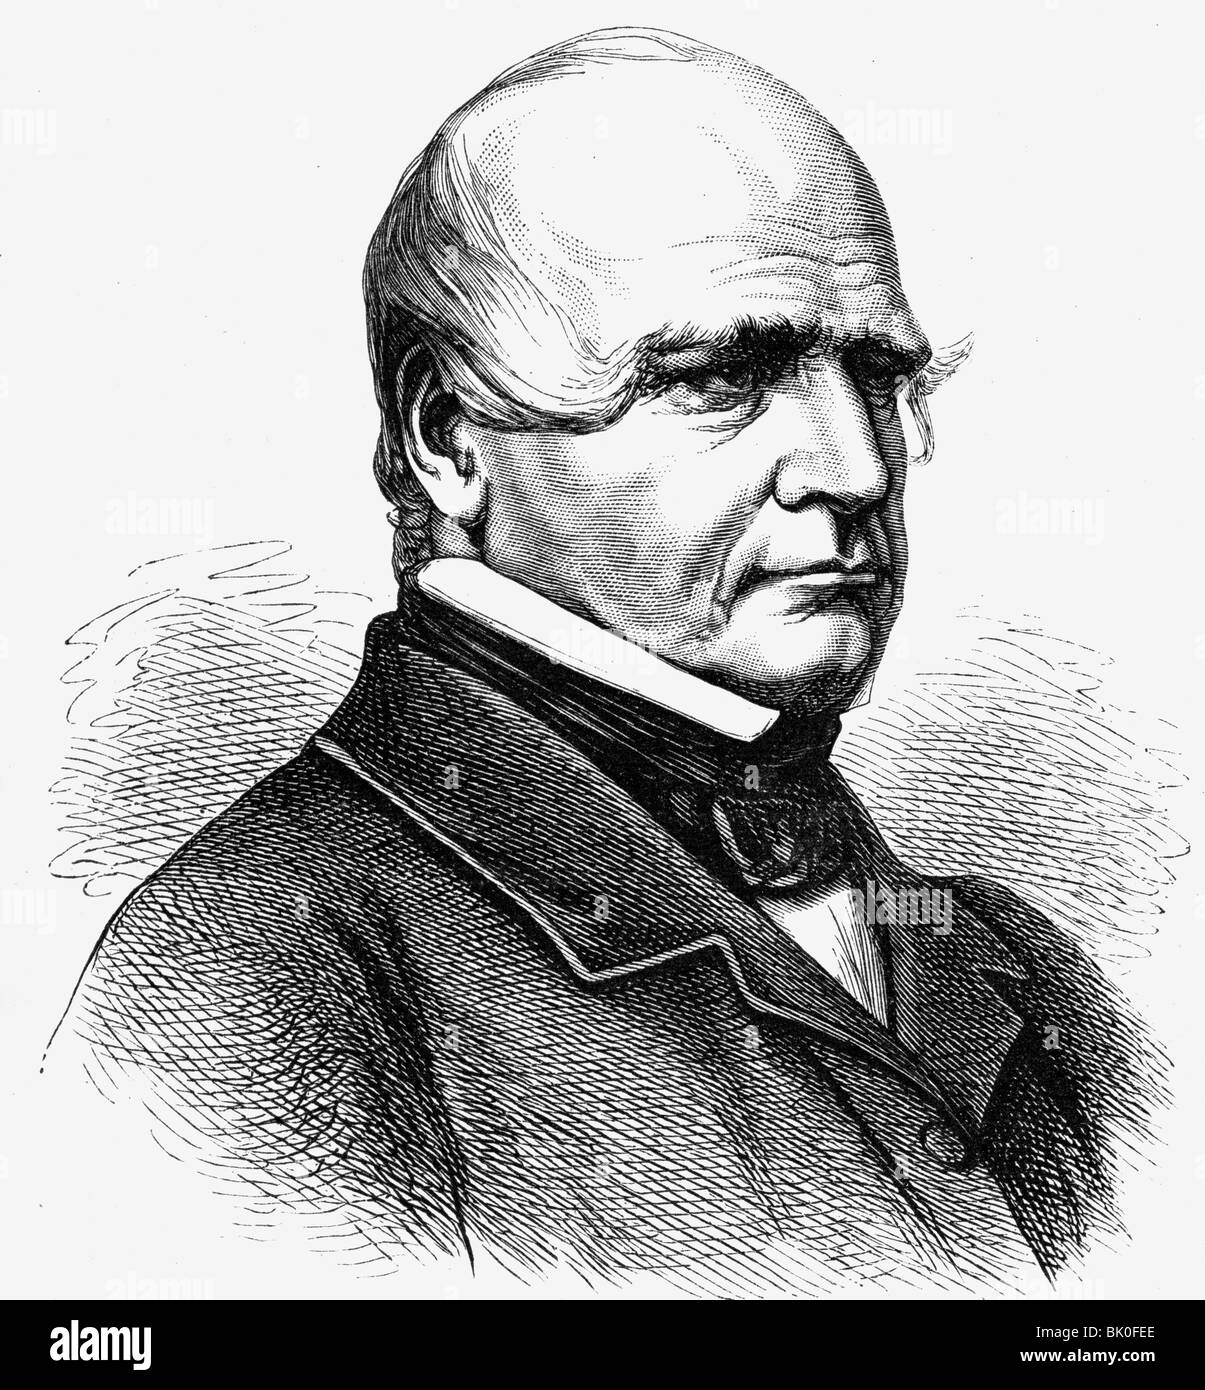 Barrot, Odilon, 19.7.1791 - 6.8.1873, French politician, Prime Minister 20.2.1848 - 31.12.1849, portrait, wood engraving, 19th century, , Stock Photo